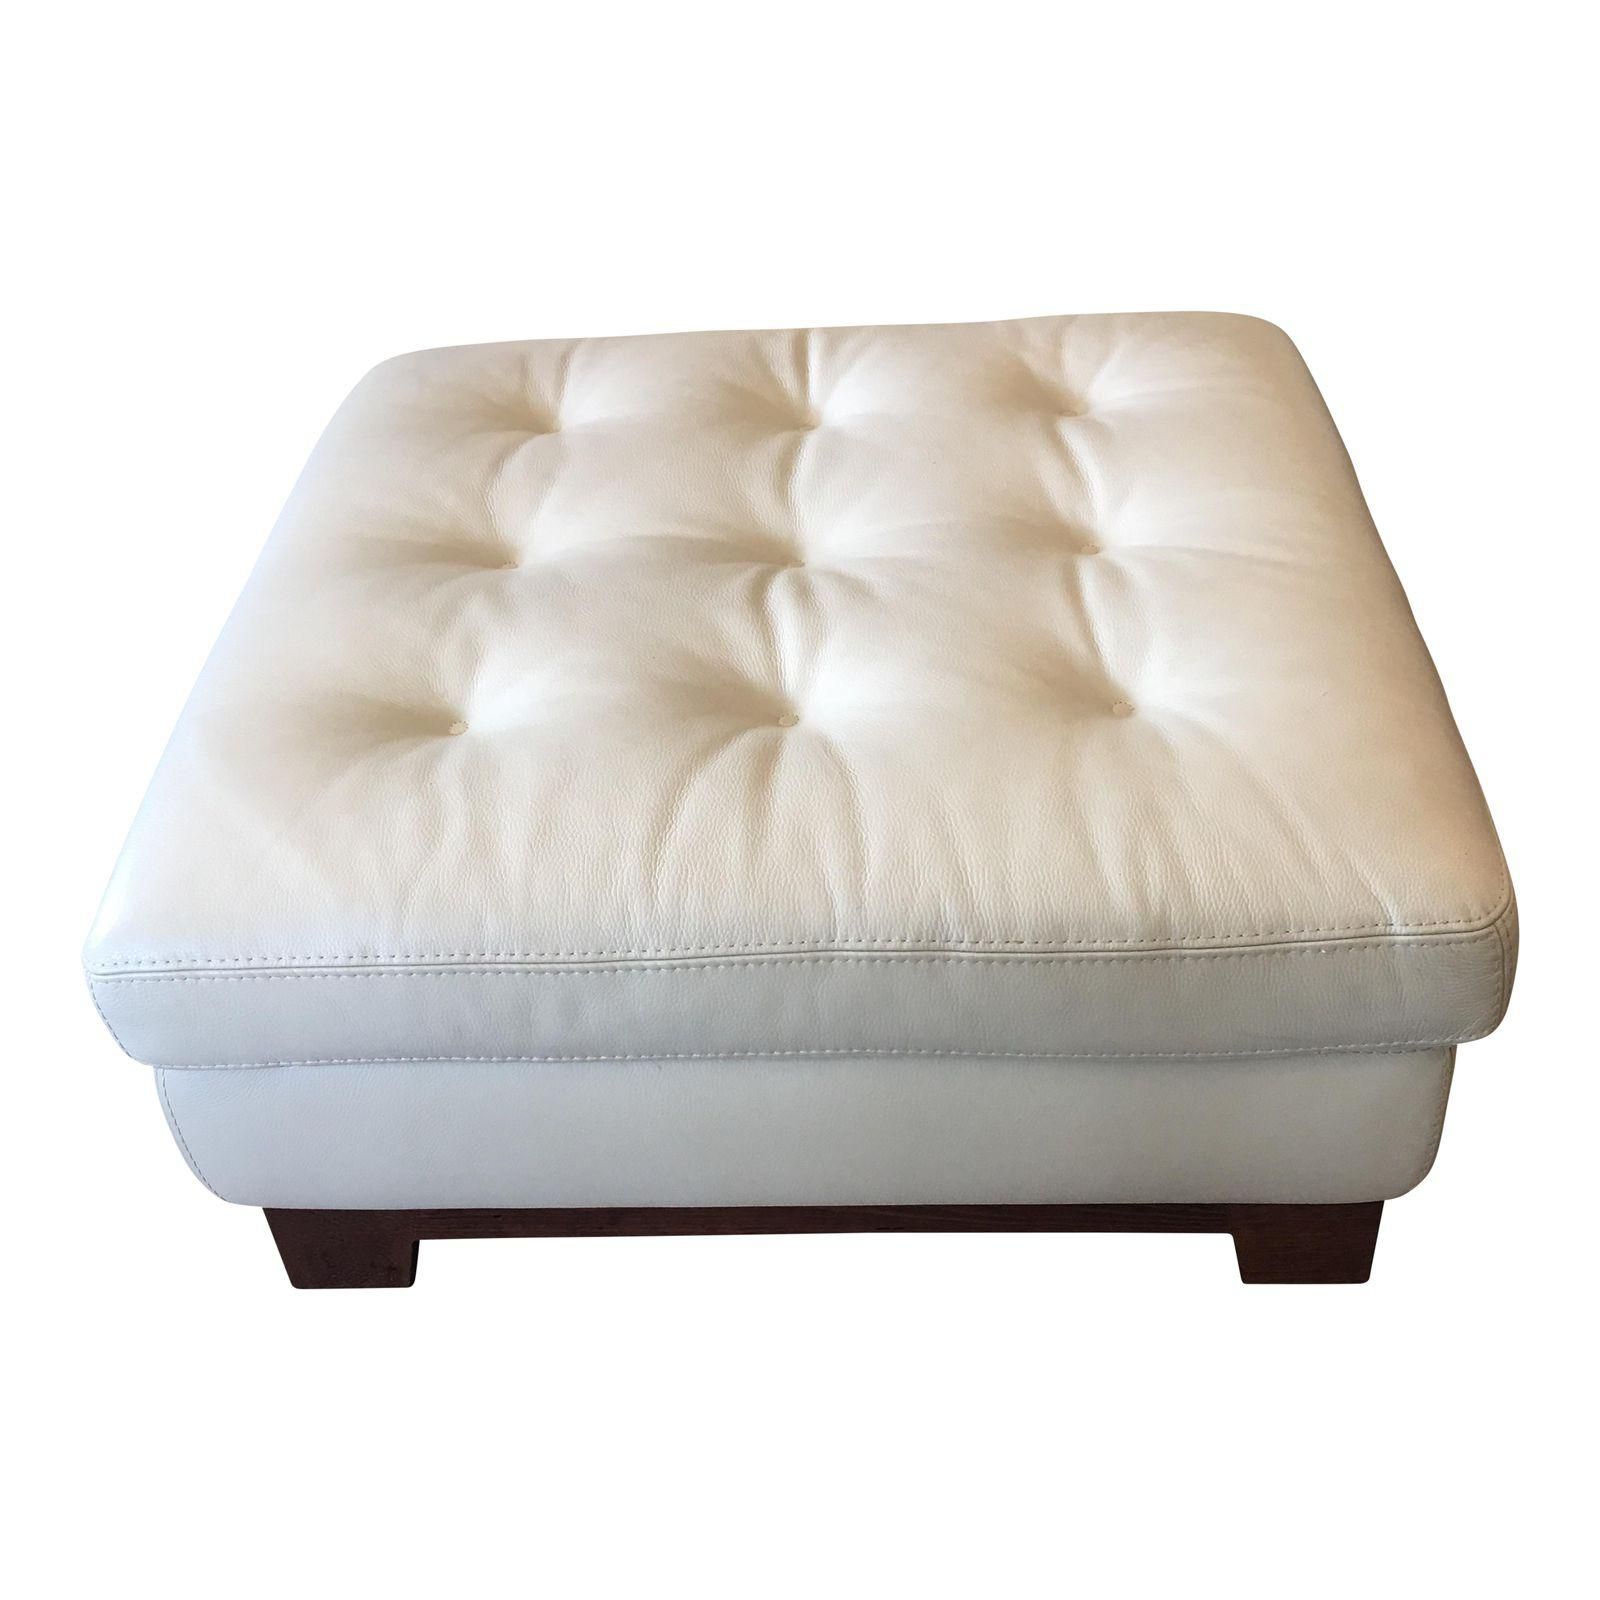 Most Current White Leatherette Ottomans Inside Roche Bobois White Leather Ottoman (View 4 of 10)